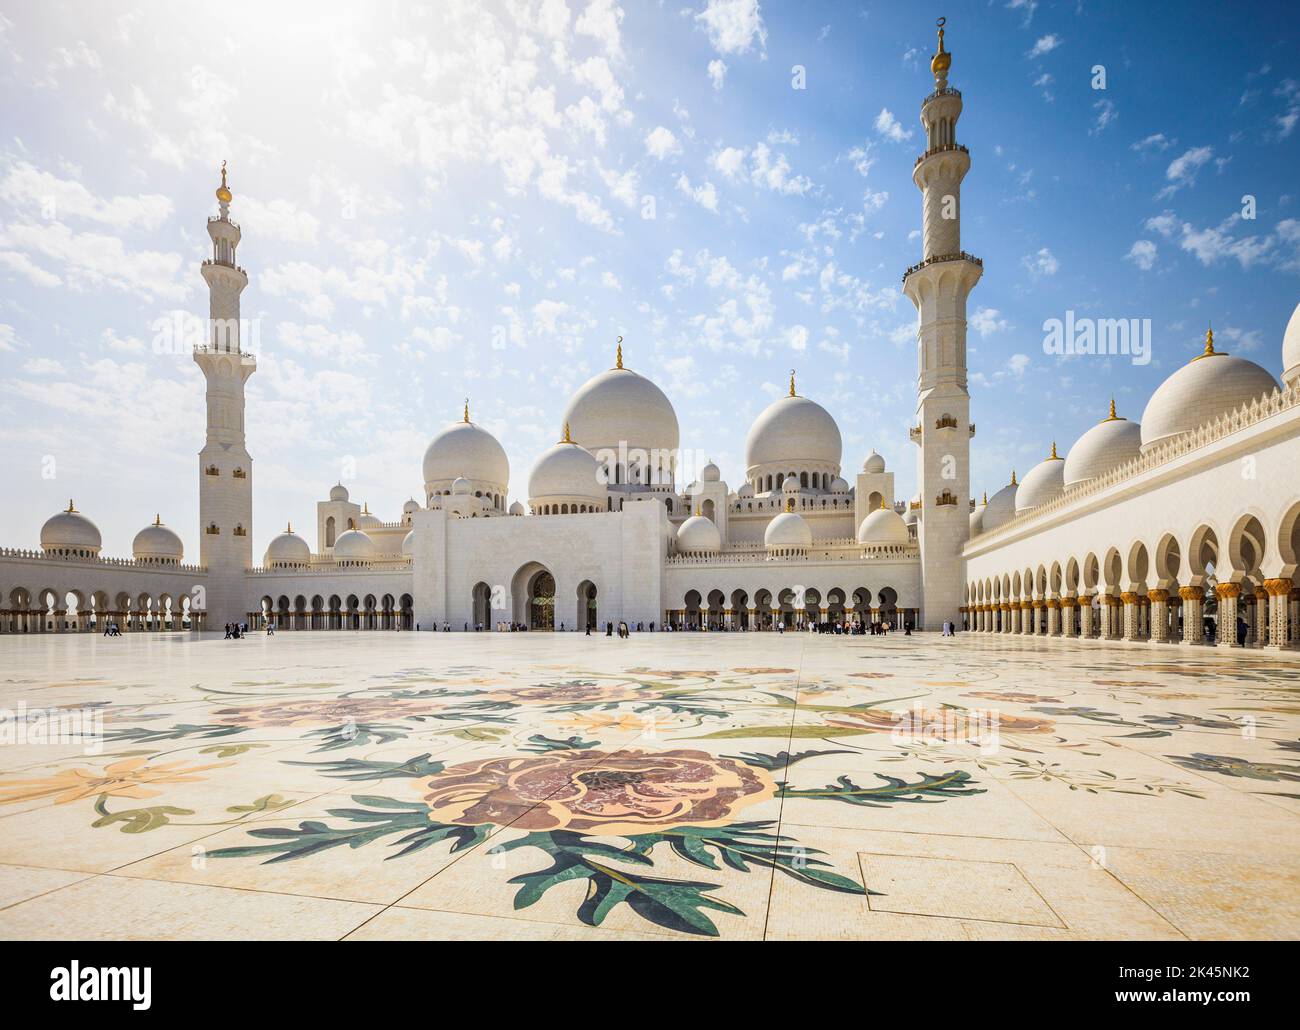 The Sheikh Zayed Mosque, the courtyard and exterior of the prayer hall, modern architecture. Stock Photo